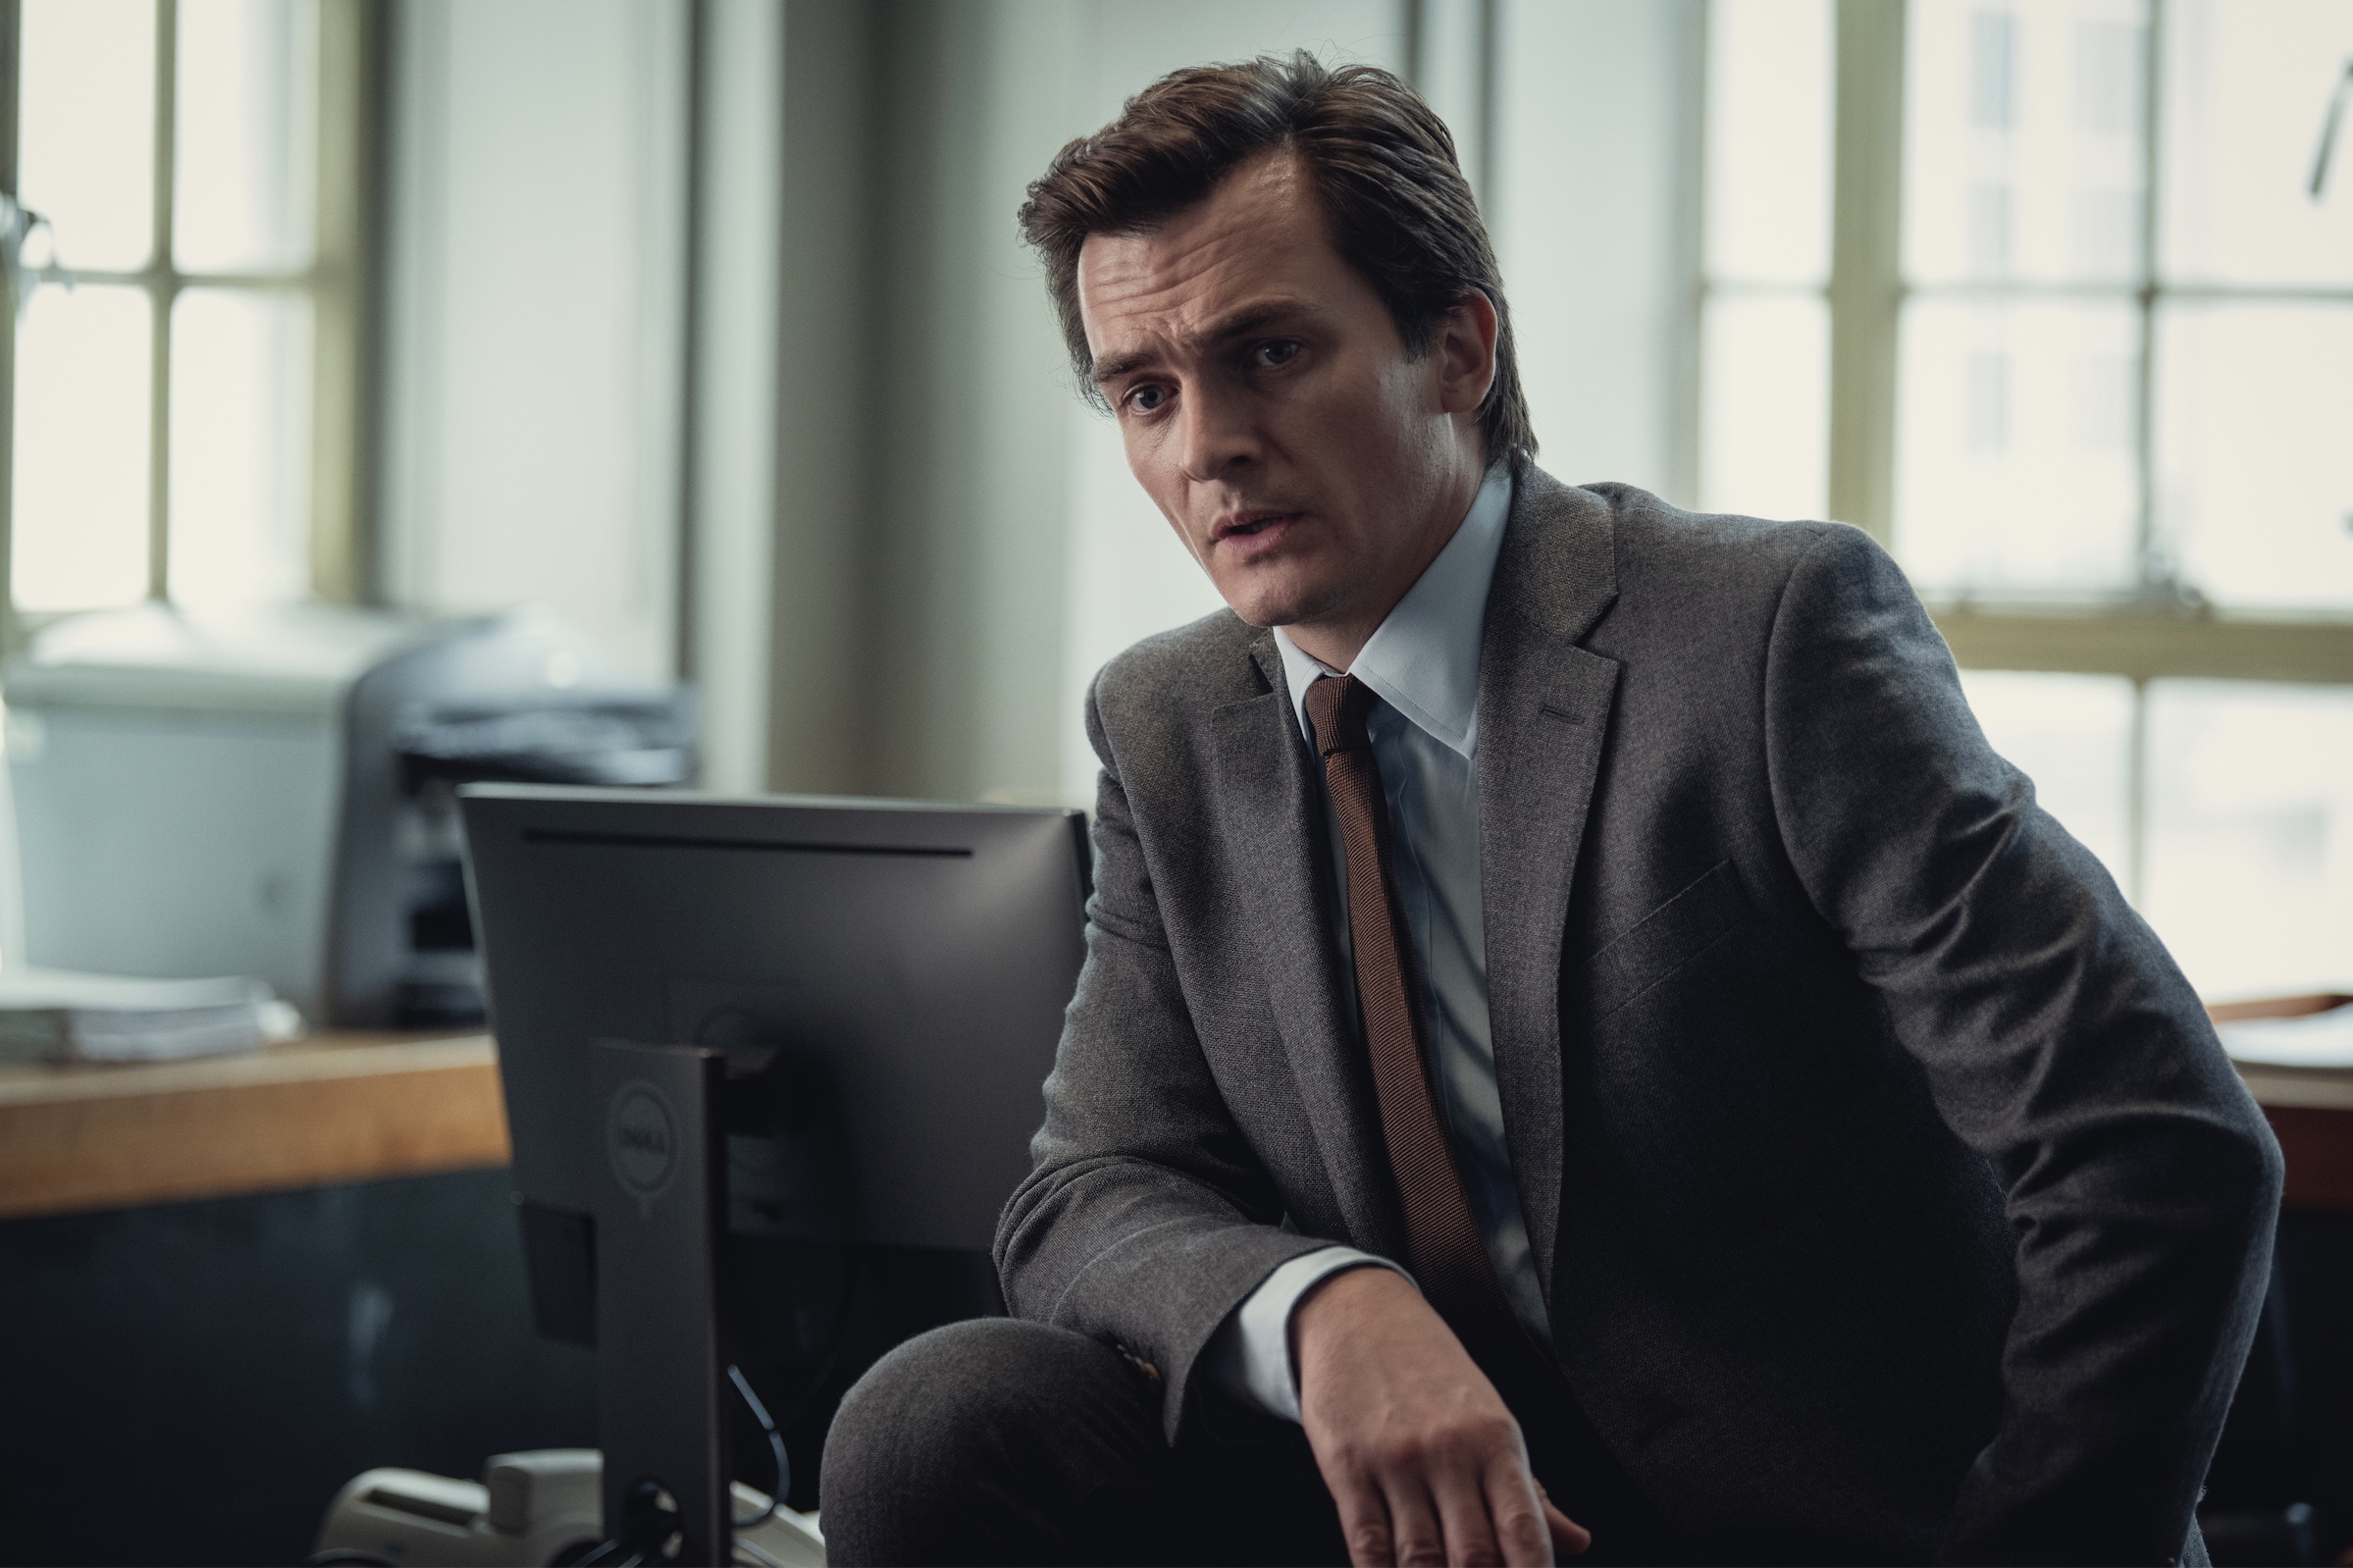 Anatomy of a Scandal Cast - Rupert Friend as James Whitehouse